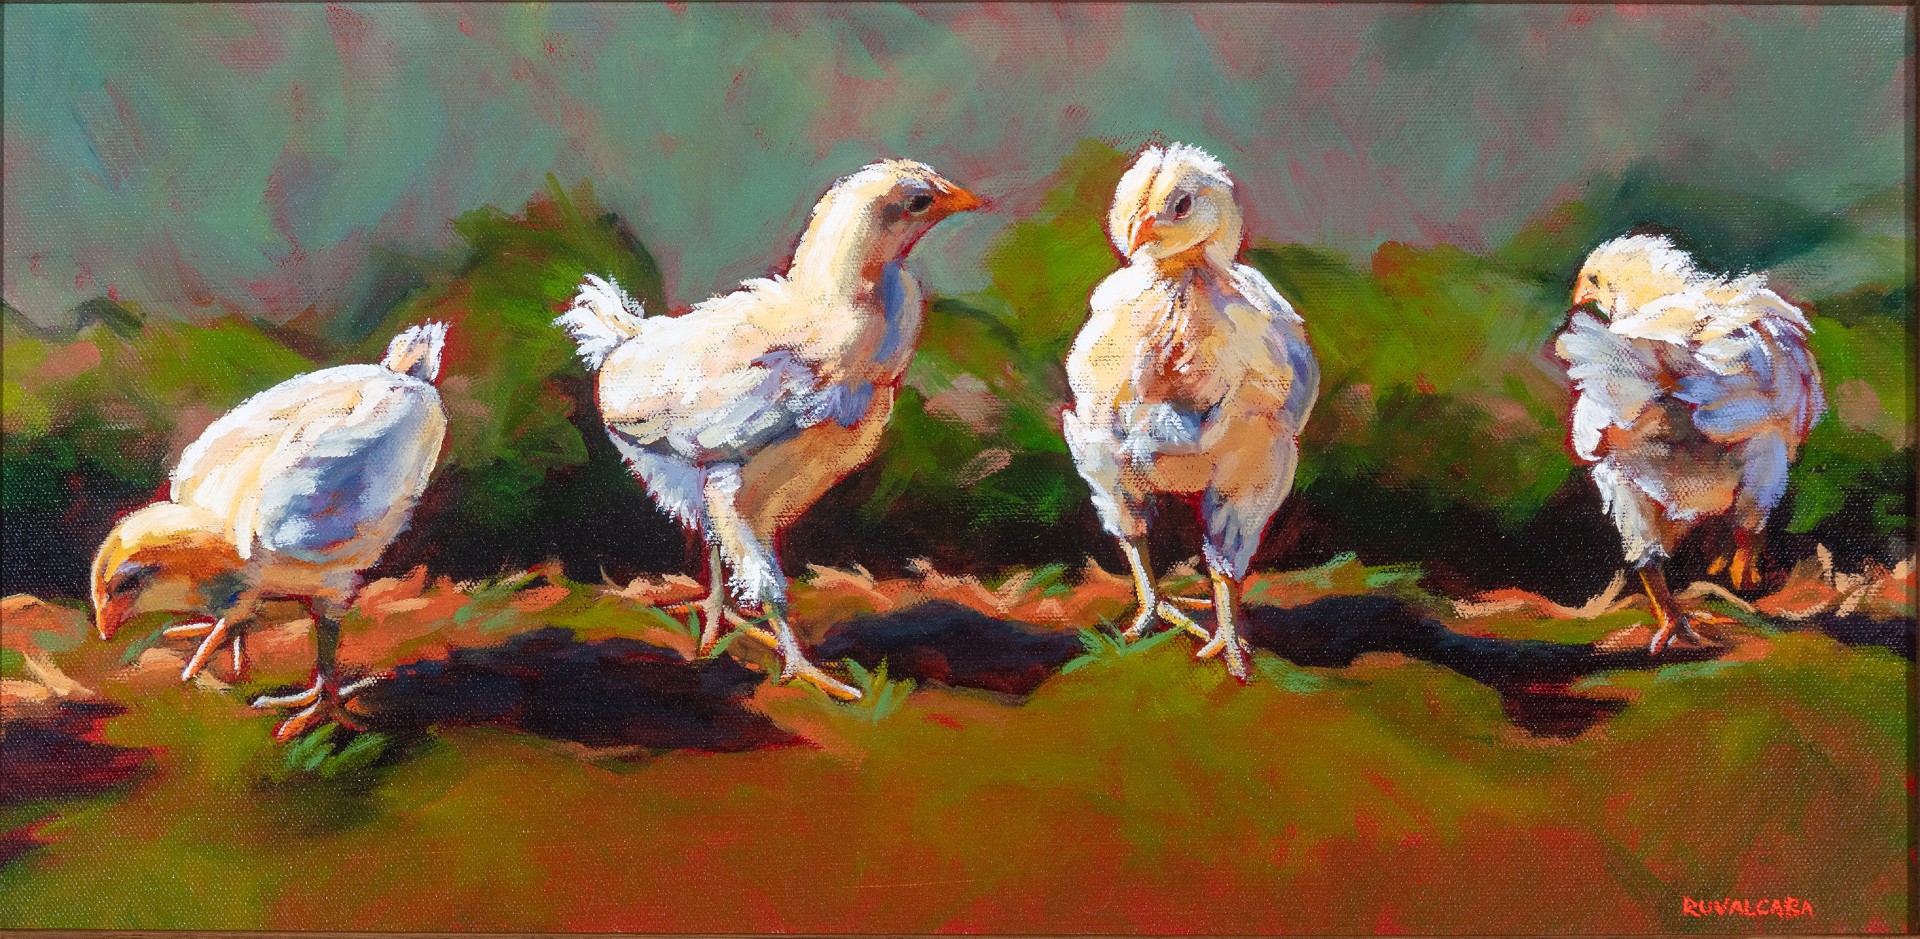 Chick Chat by Cathryn Ruvalcaba